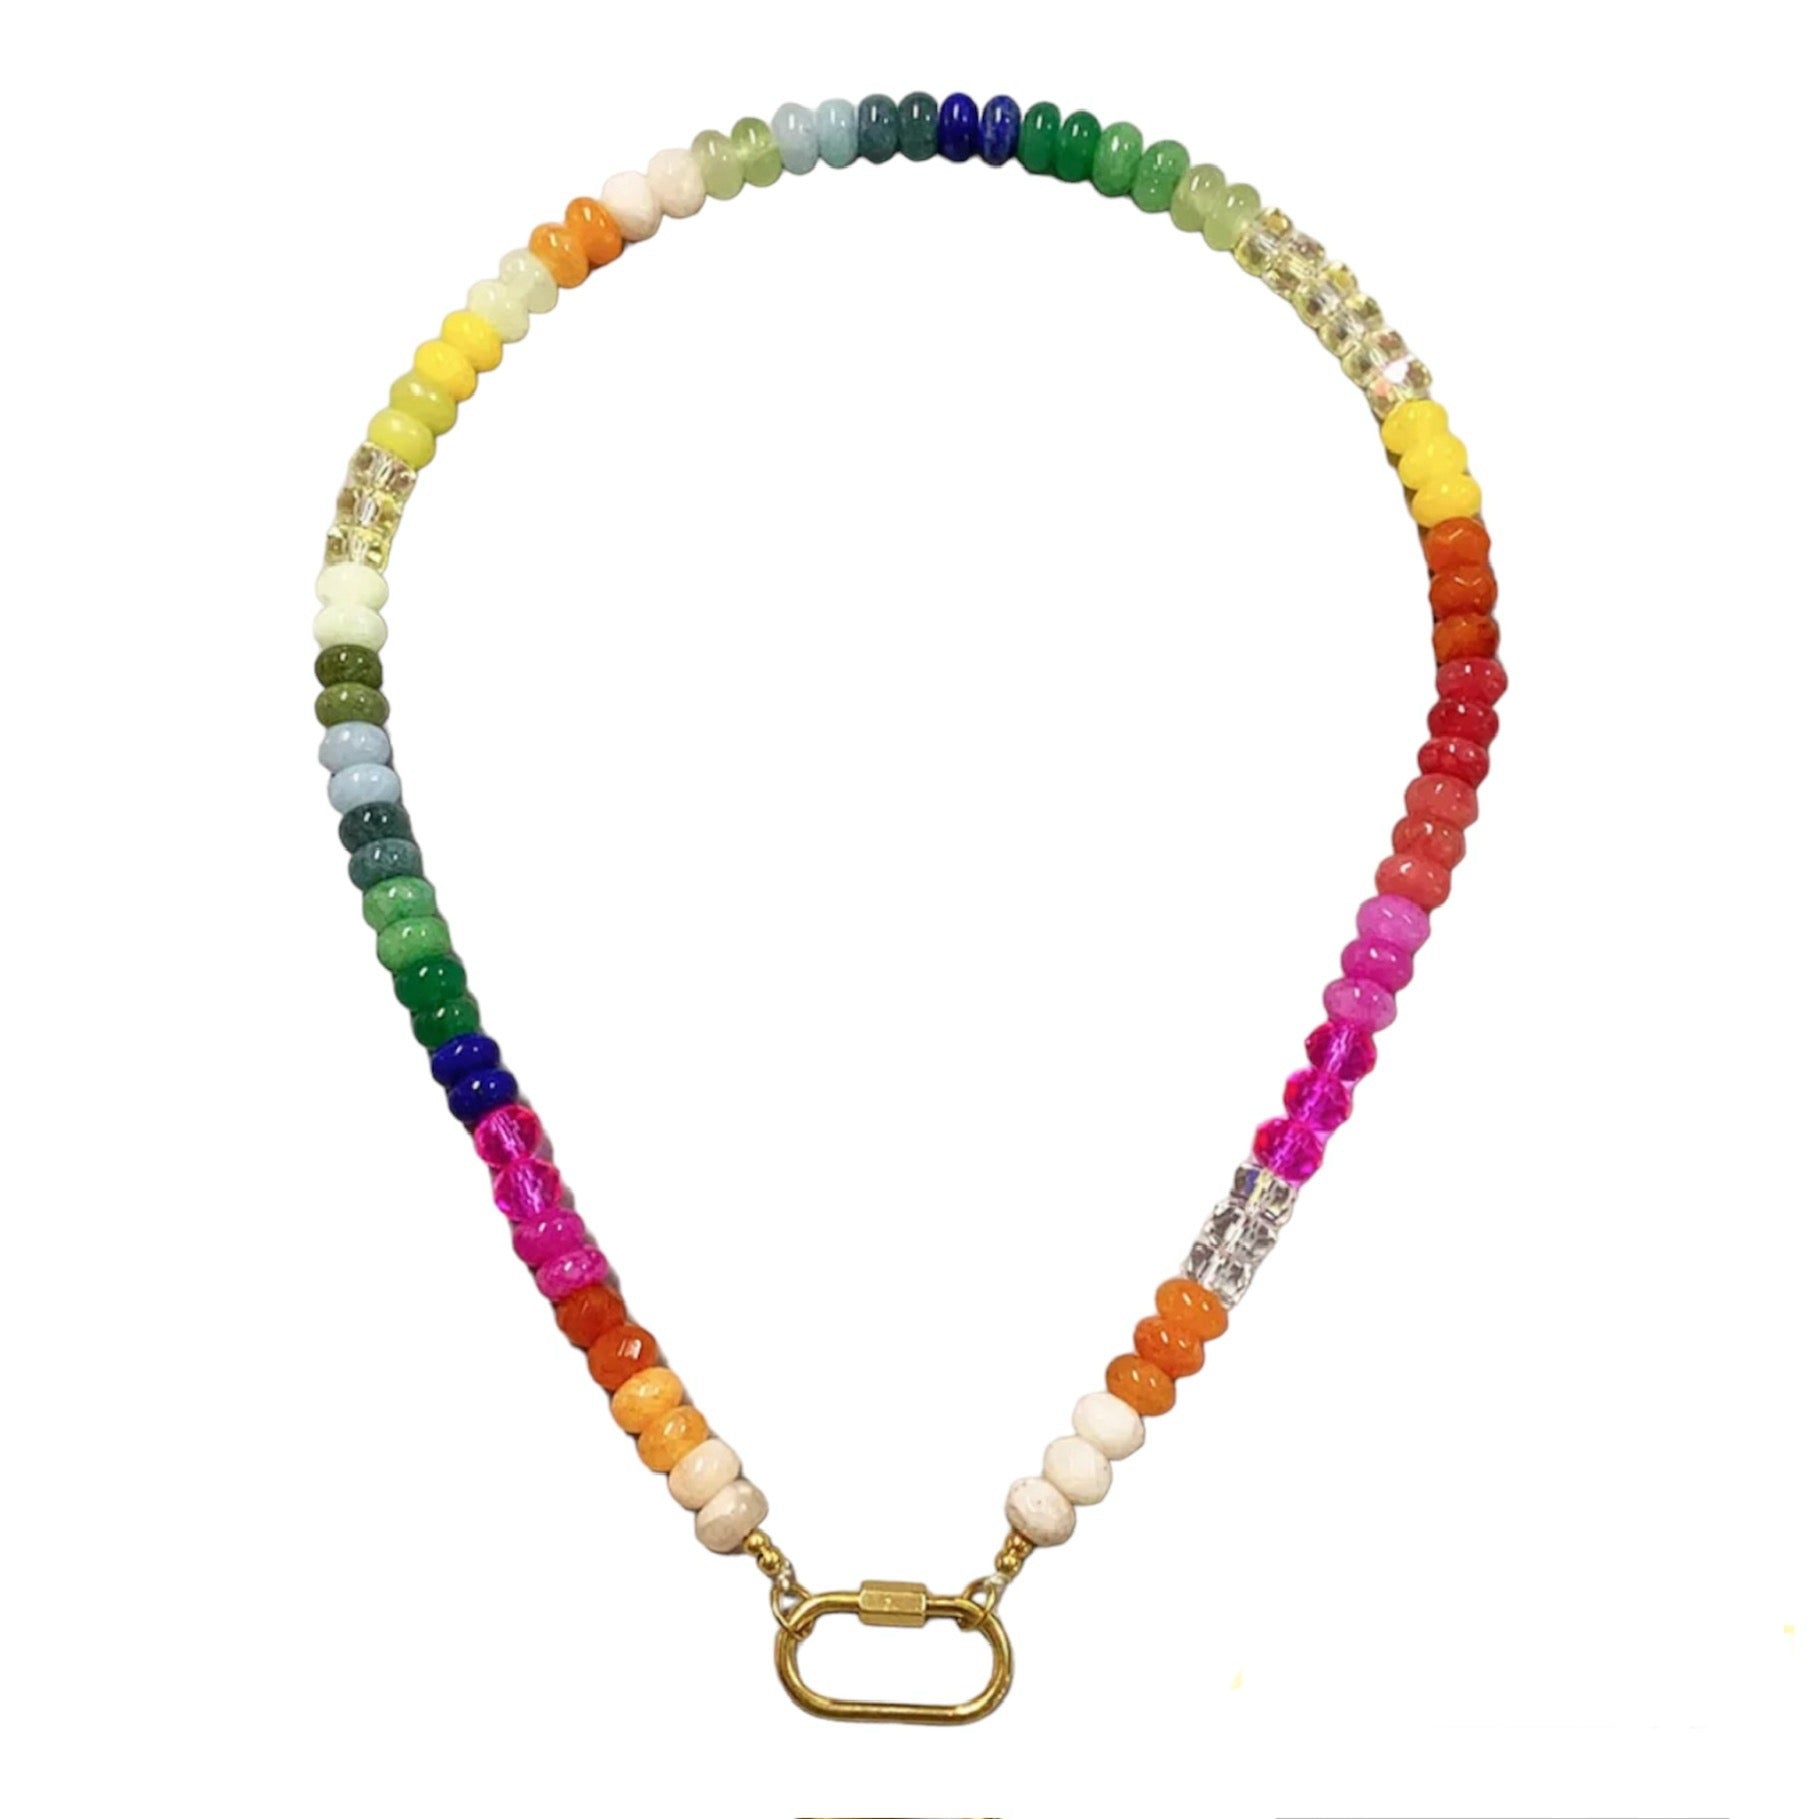 Island Rainbow Necklace Semi-precious gemstone necklace with a gold-plated titanium, shop the best gift gifts for her for him from Inna carton online store dubai, UAE!